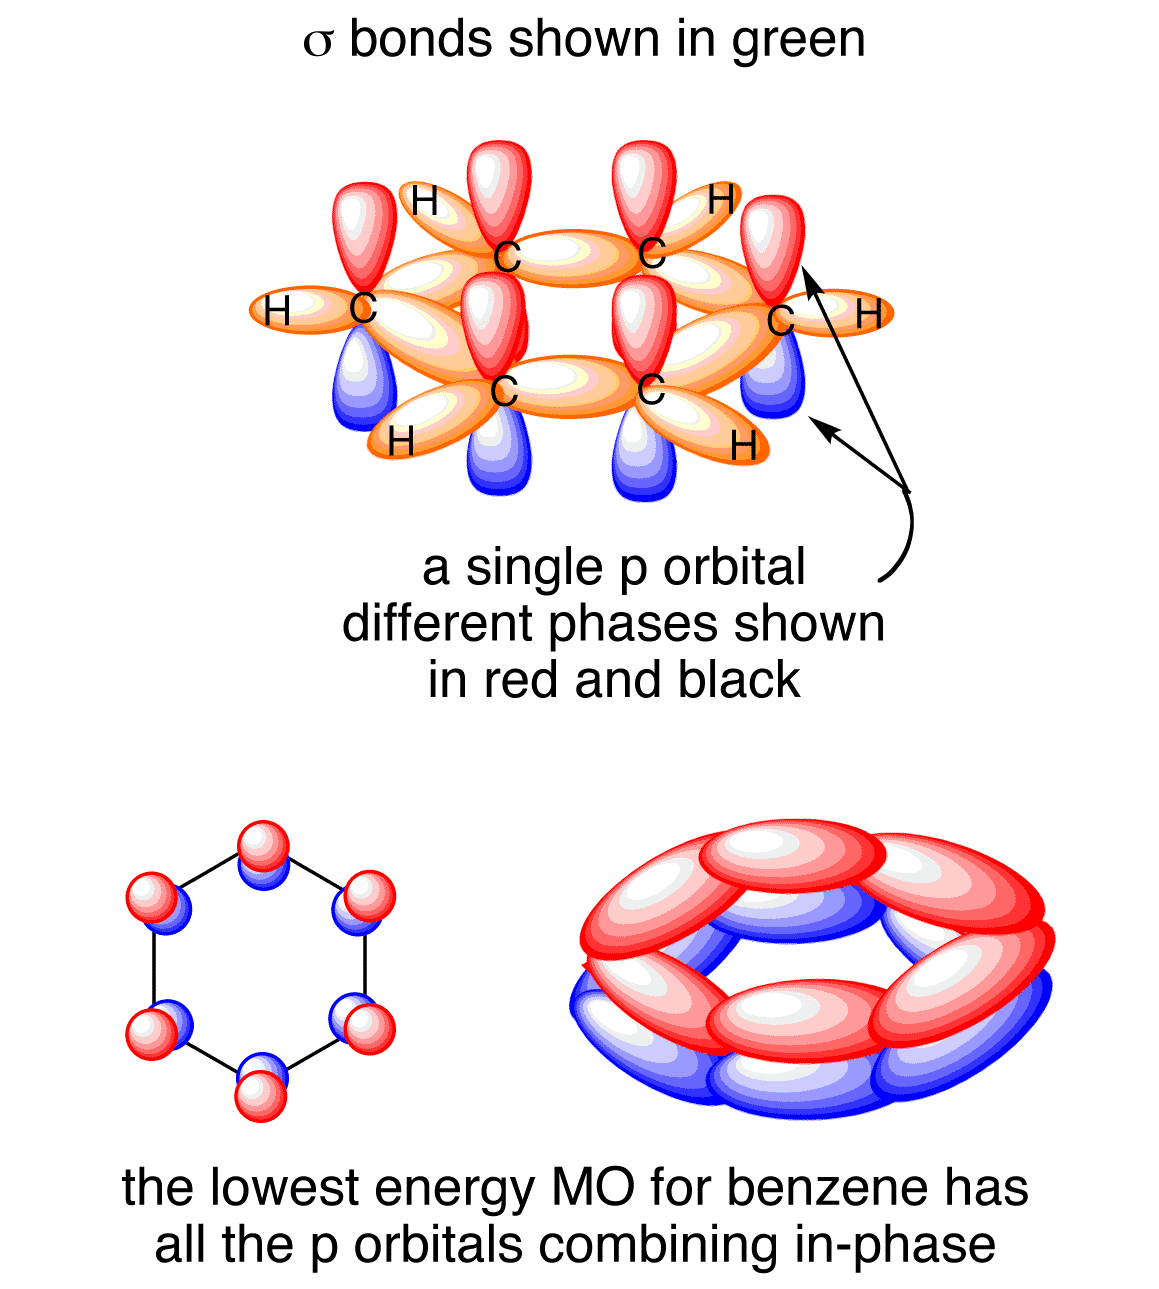 File:Potassium-cyanide-phase-I-unit-cell-3D-balls.png - Wikimedia Commons